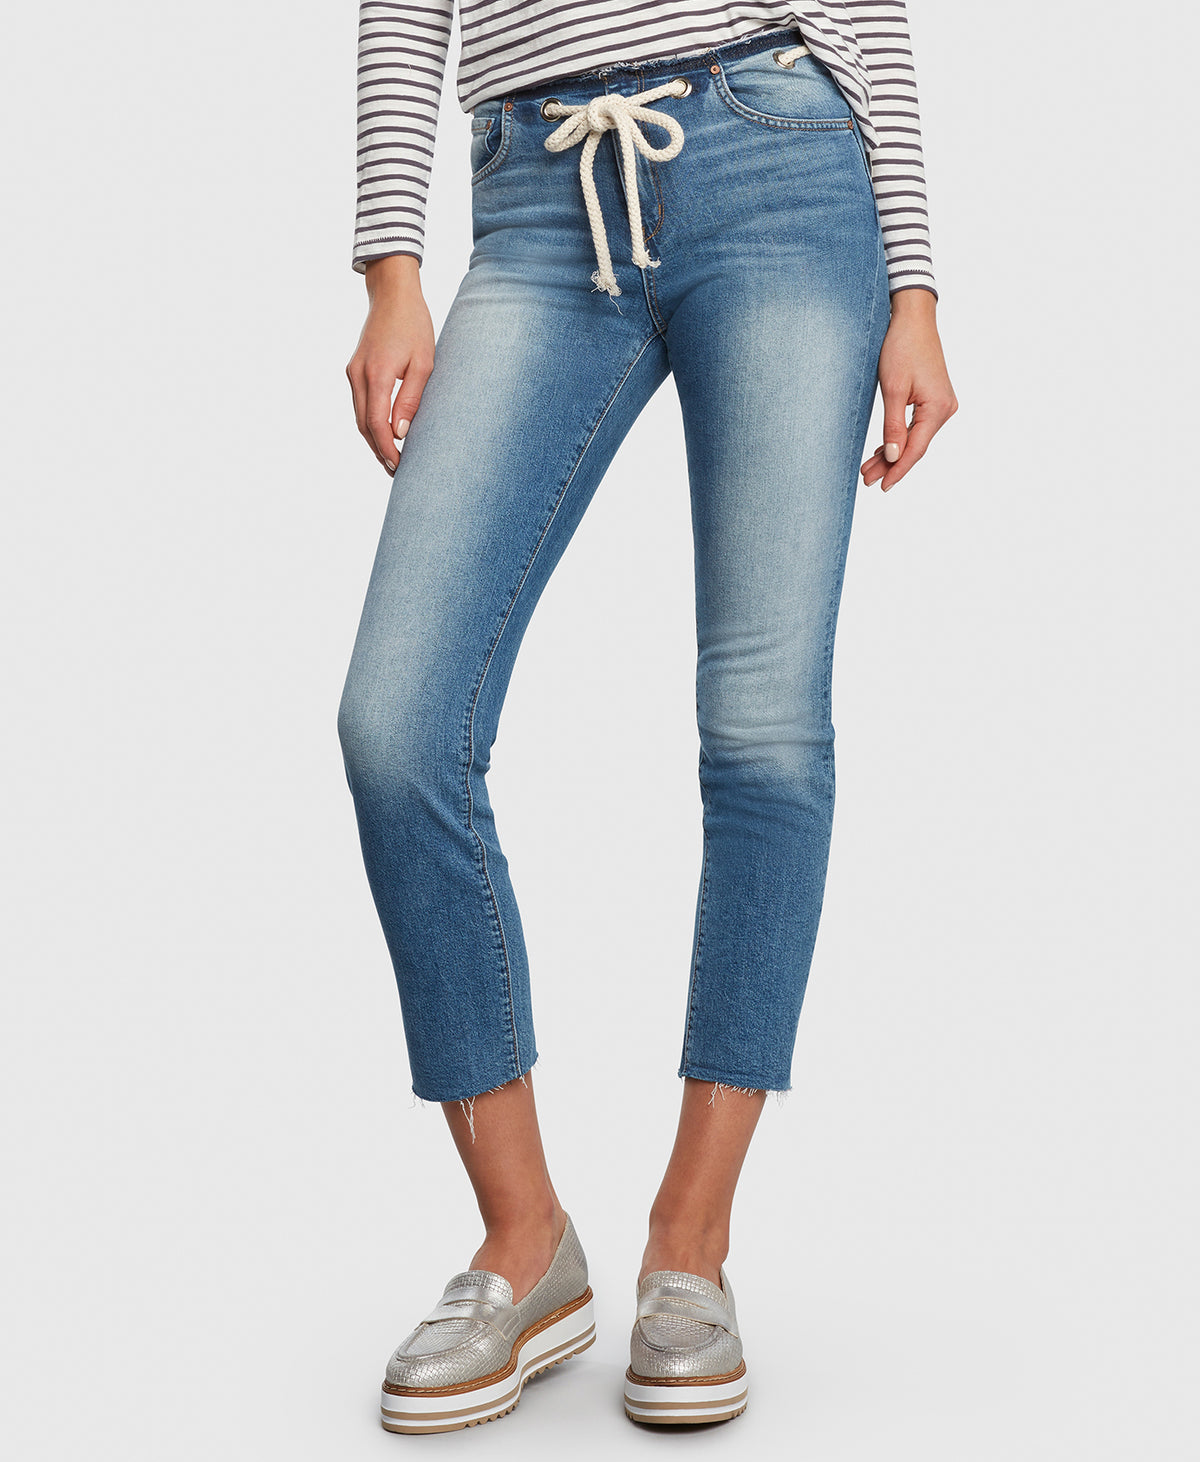 Principle CASTAWAY in Holiday cropped jeans detail